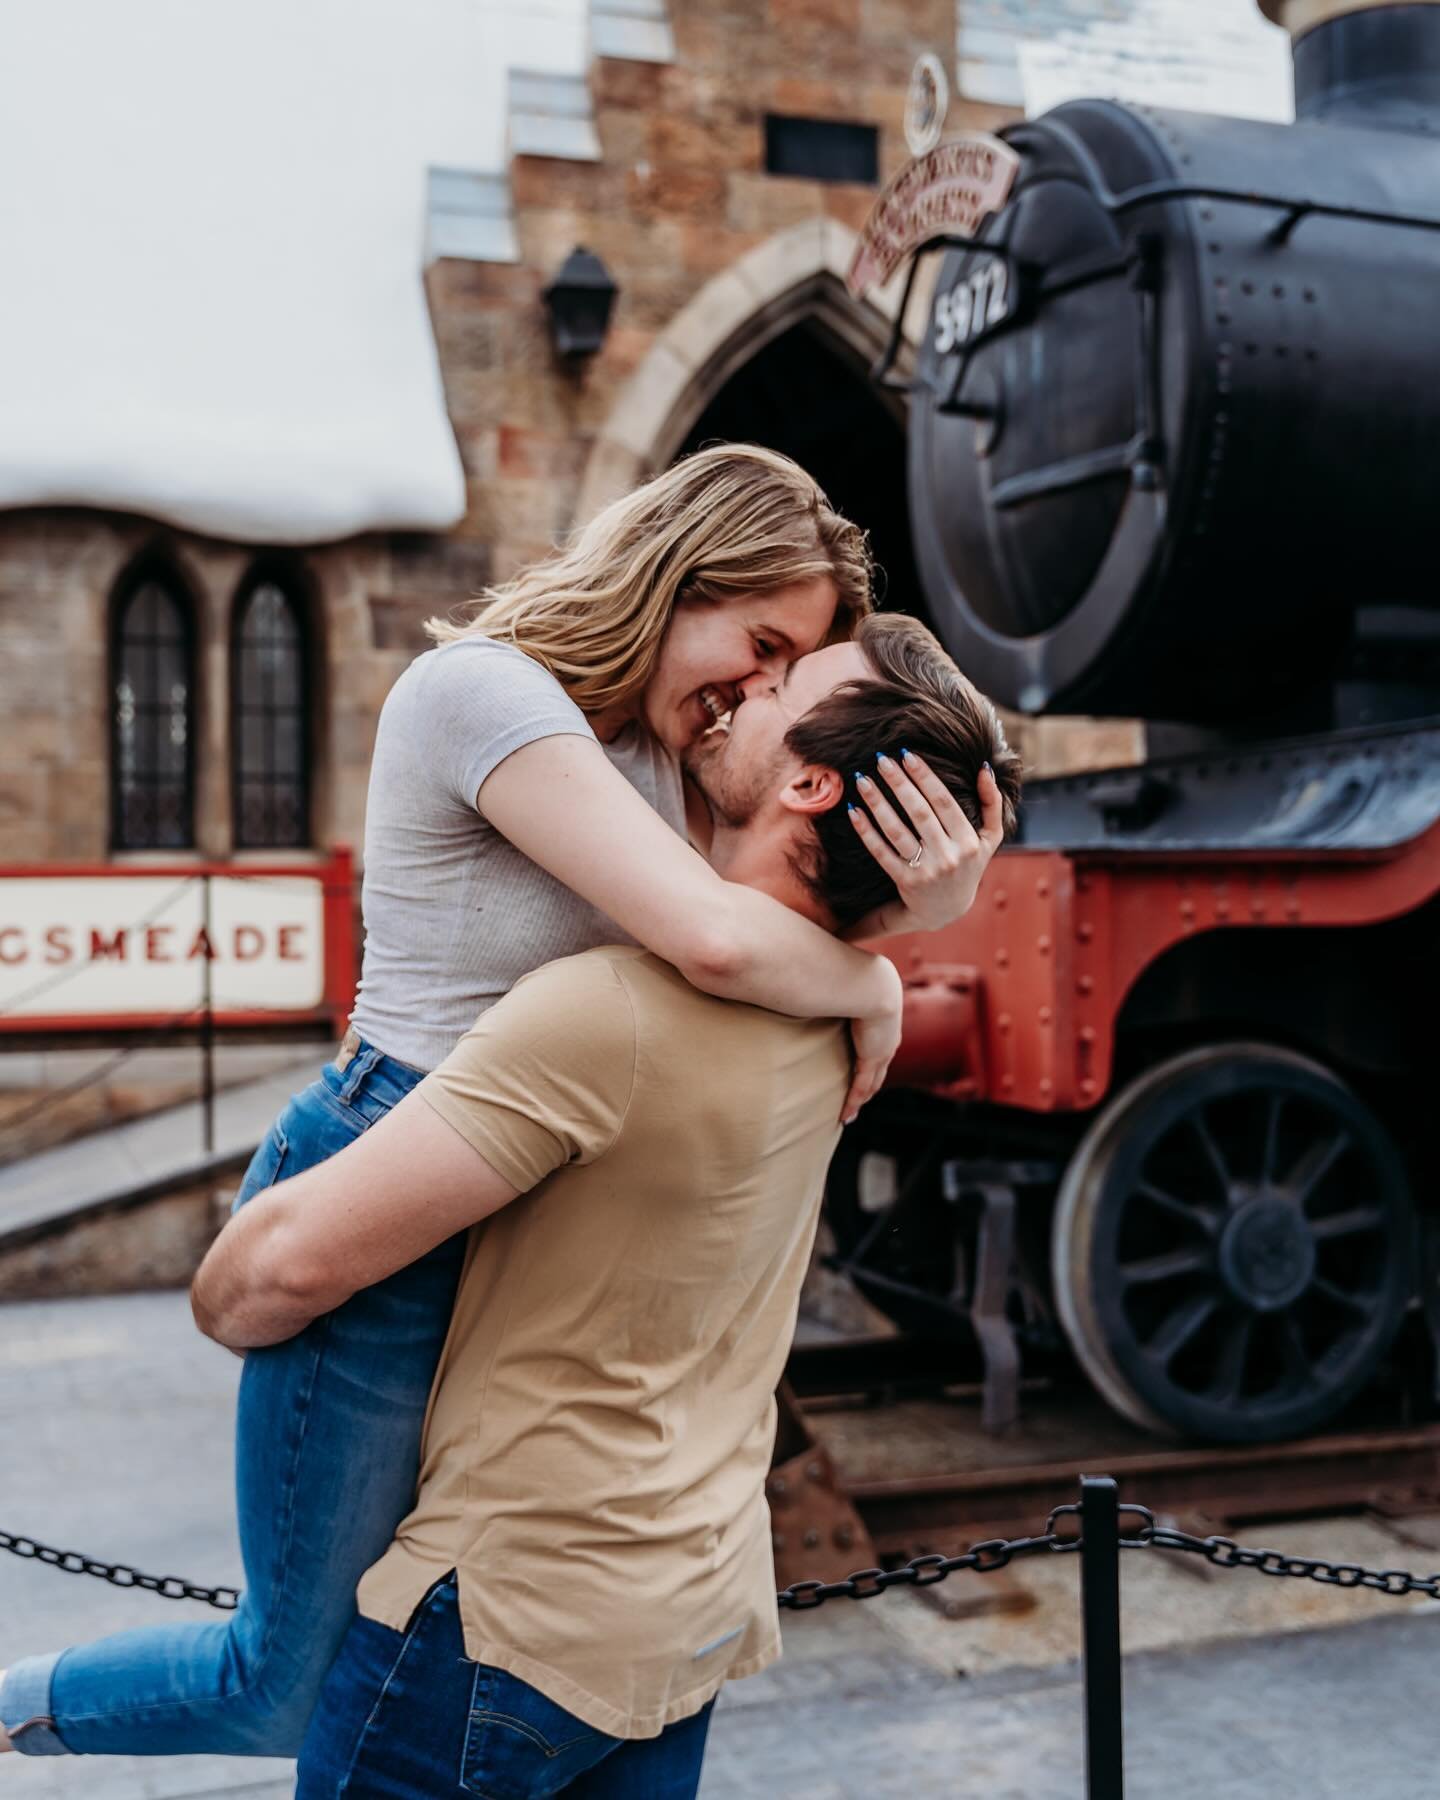 POV: Let&rsquo;s make every single one of your HP dreams come true, run away, and get engaged at Hogwarts. ✨

Every. Single. Thing. Worked out SO perfectly for these two&hellip;
✨An extra special tour *I* hadn&rsquo;t ever seen or been on before 
✨Te